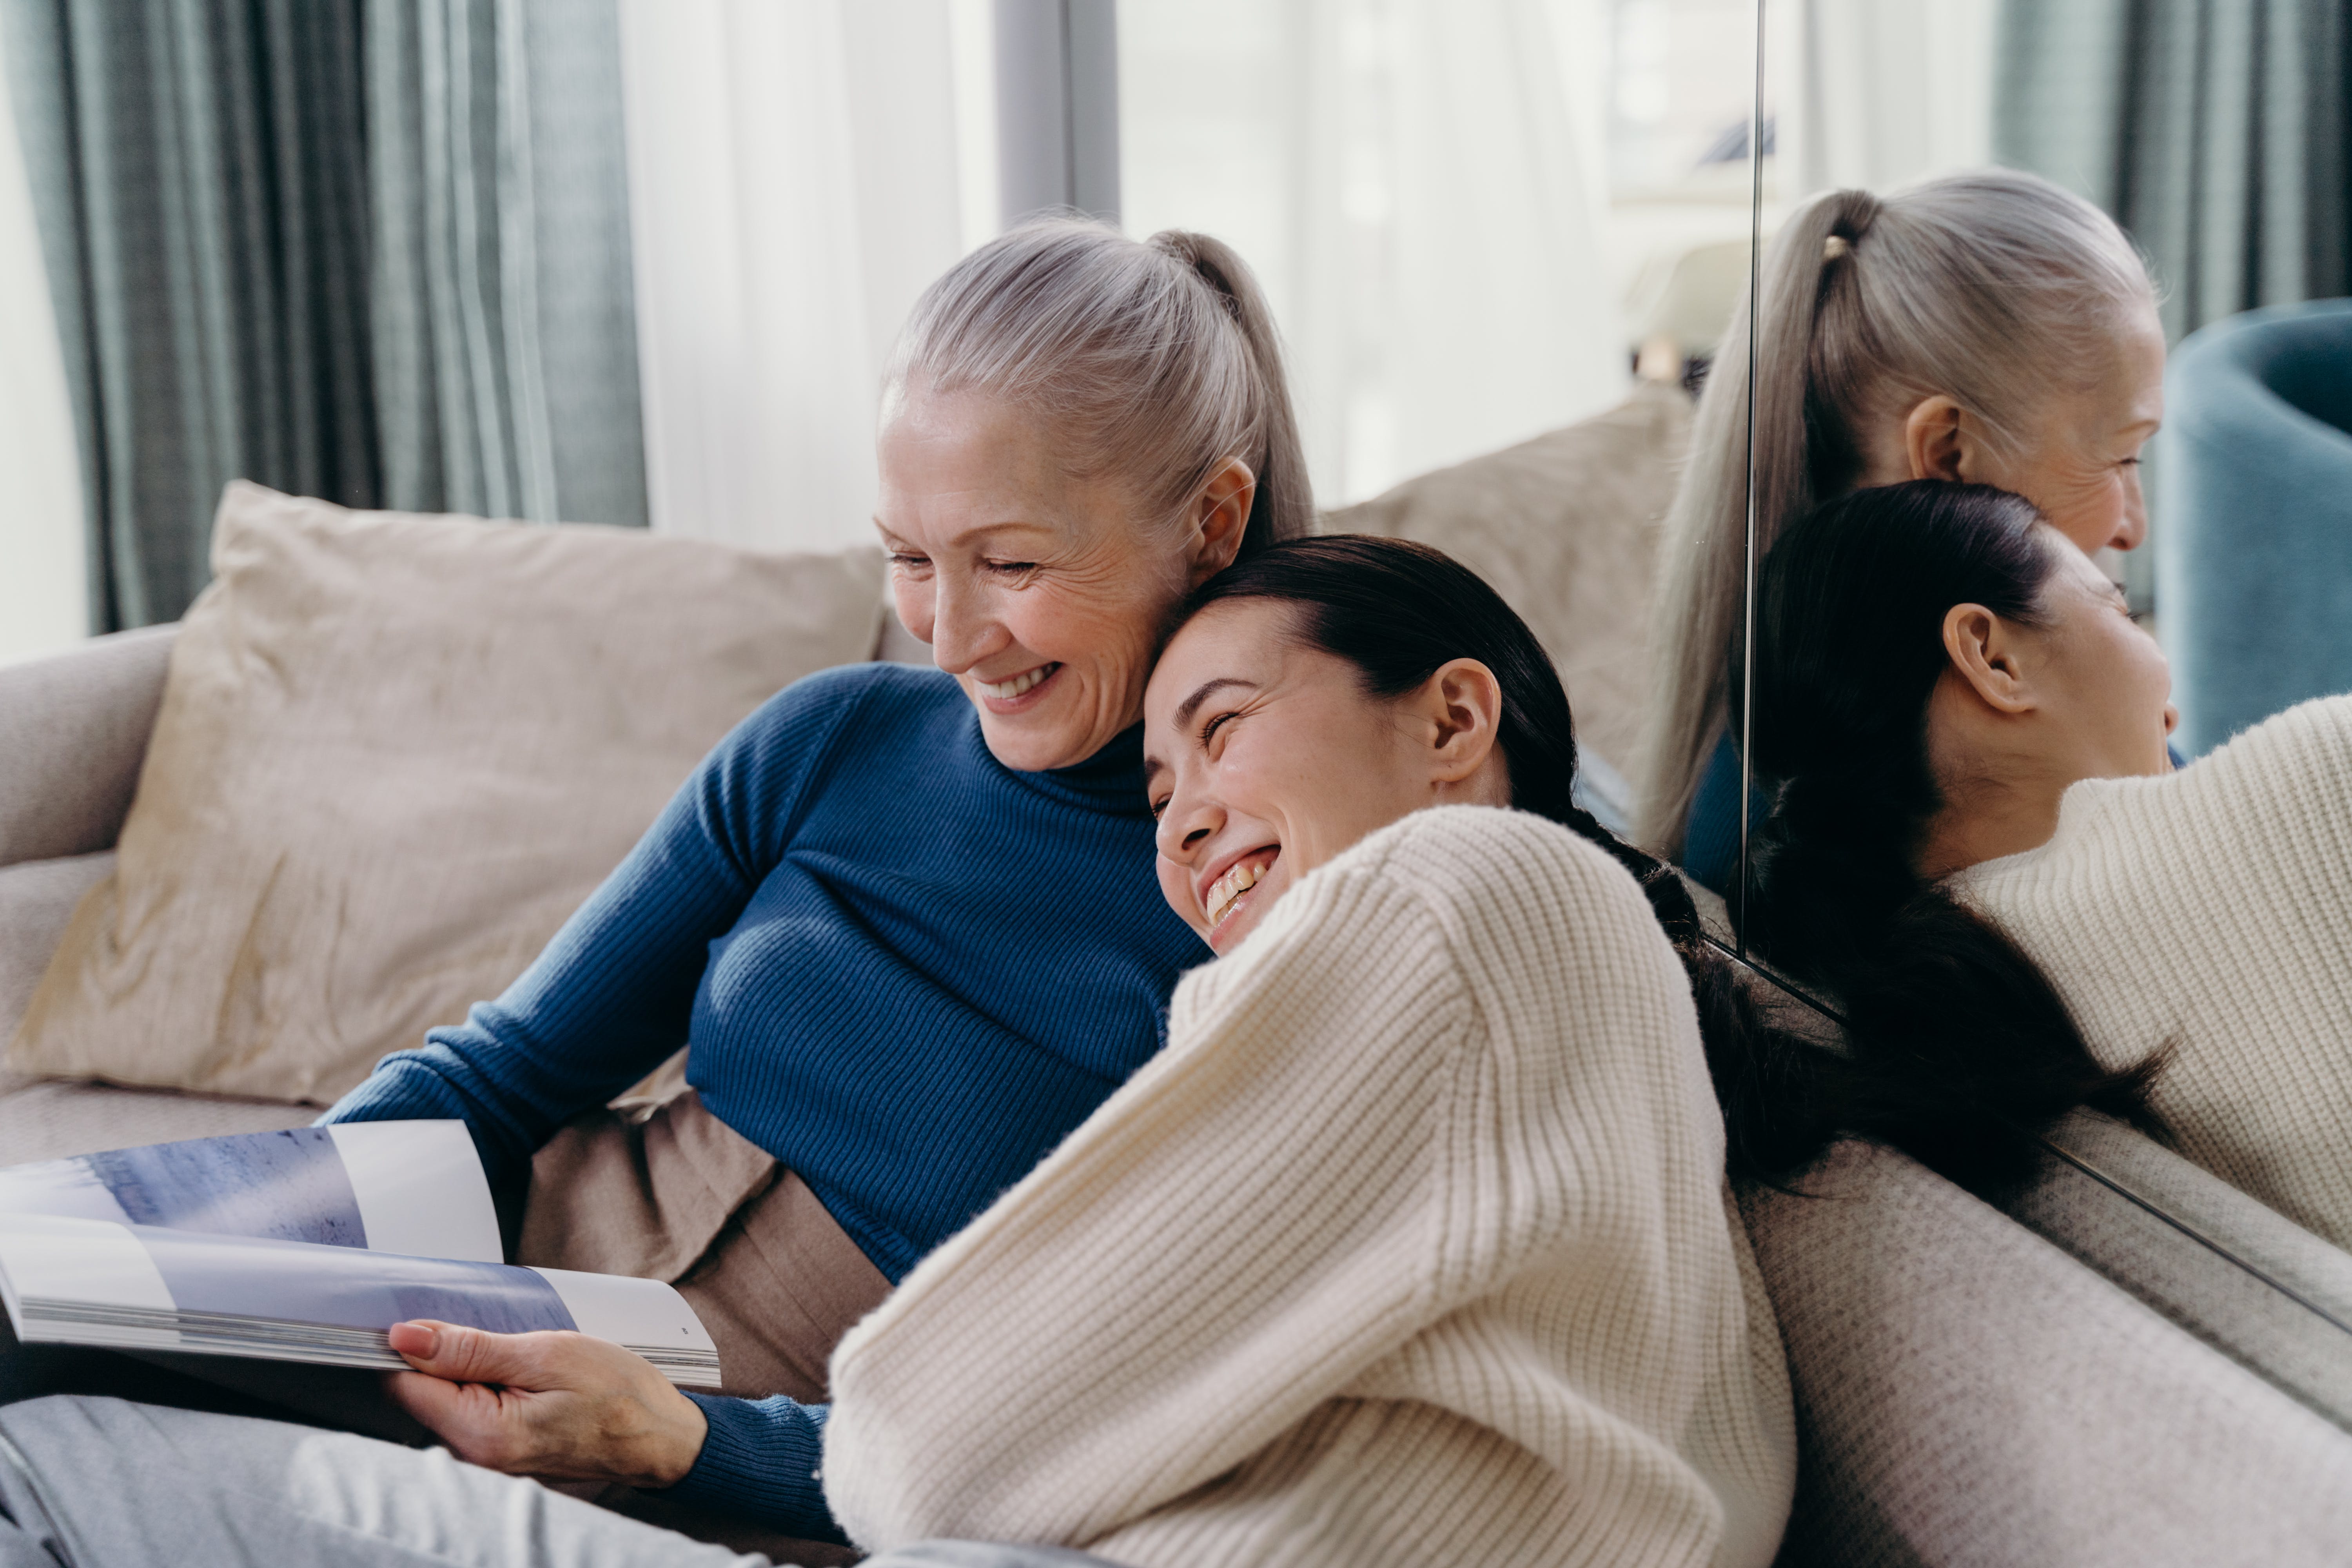 An elderly woman laughing with a young woman on the couch | Source: Pexels